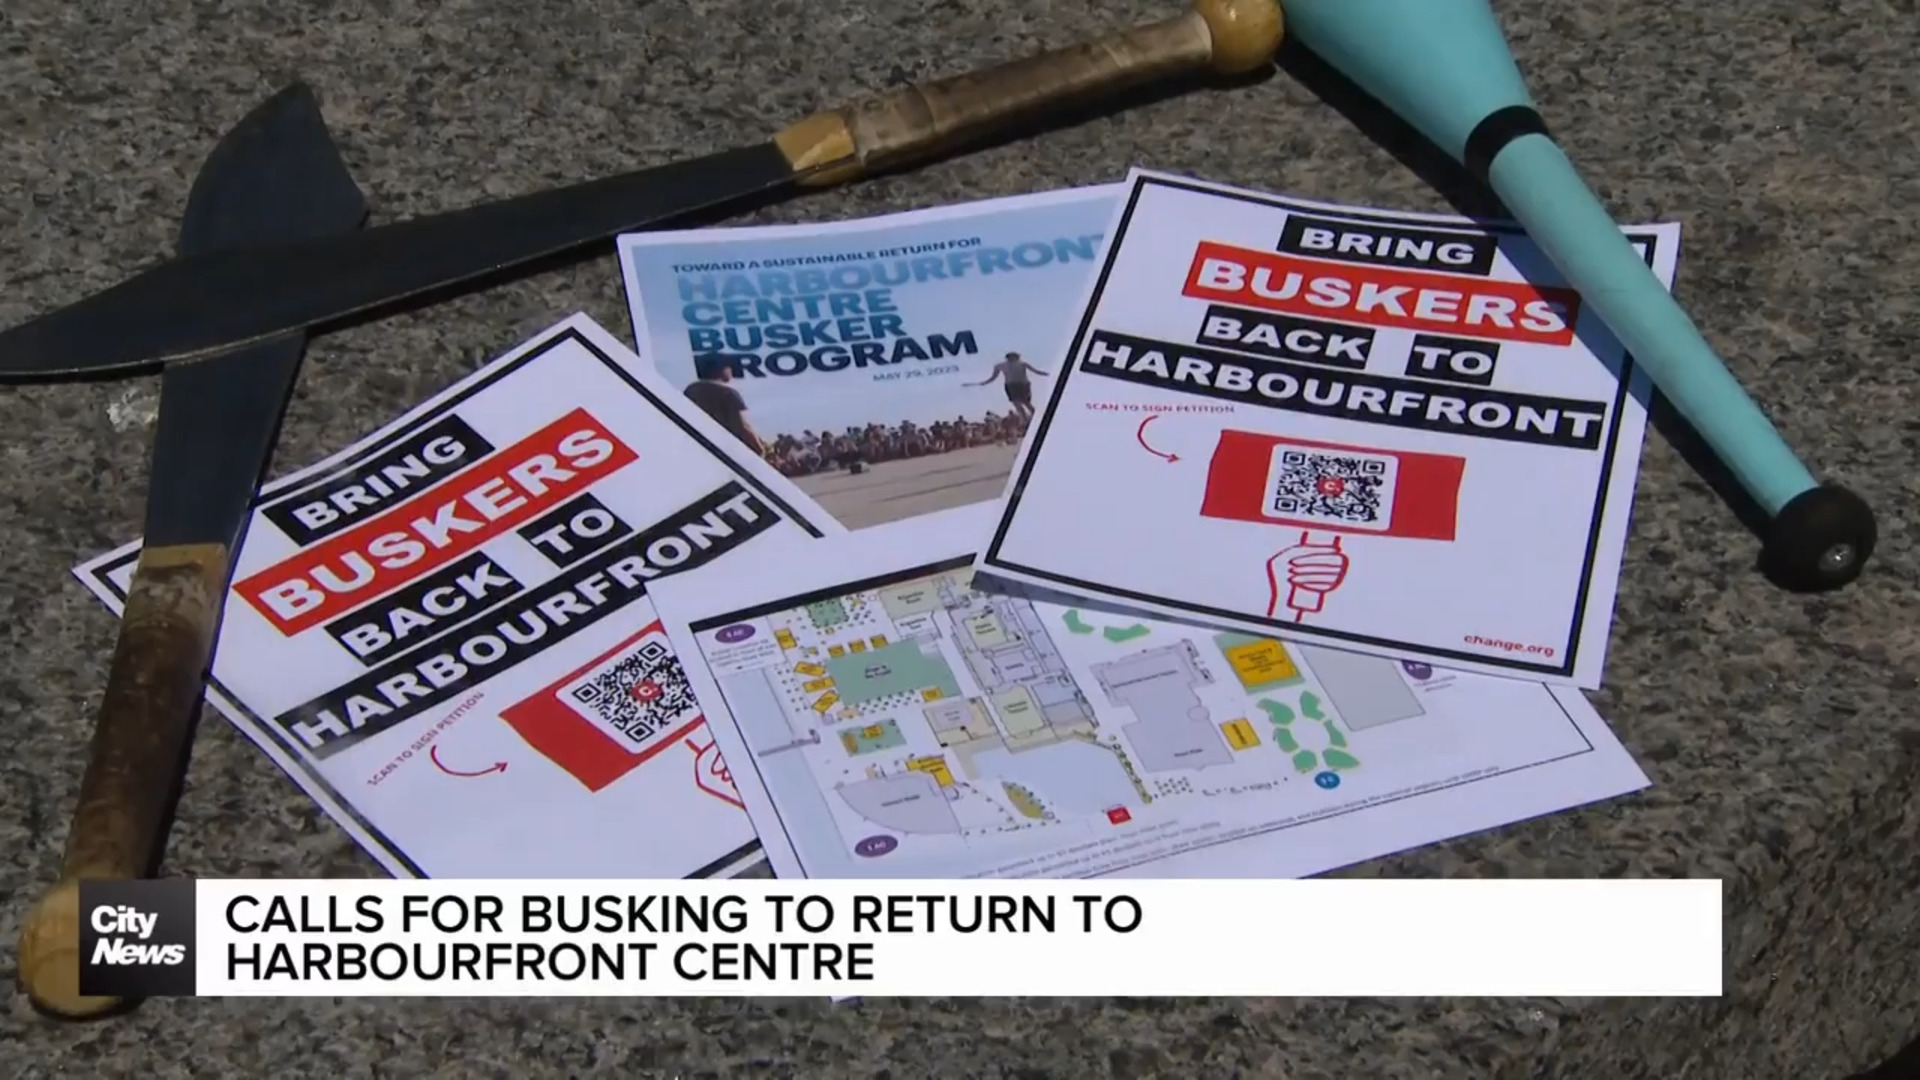 Calls for busking to return to Harbourfront Centre